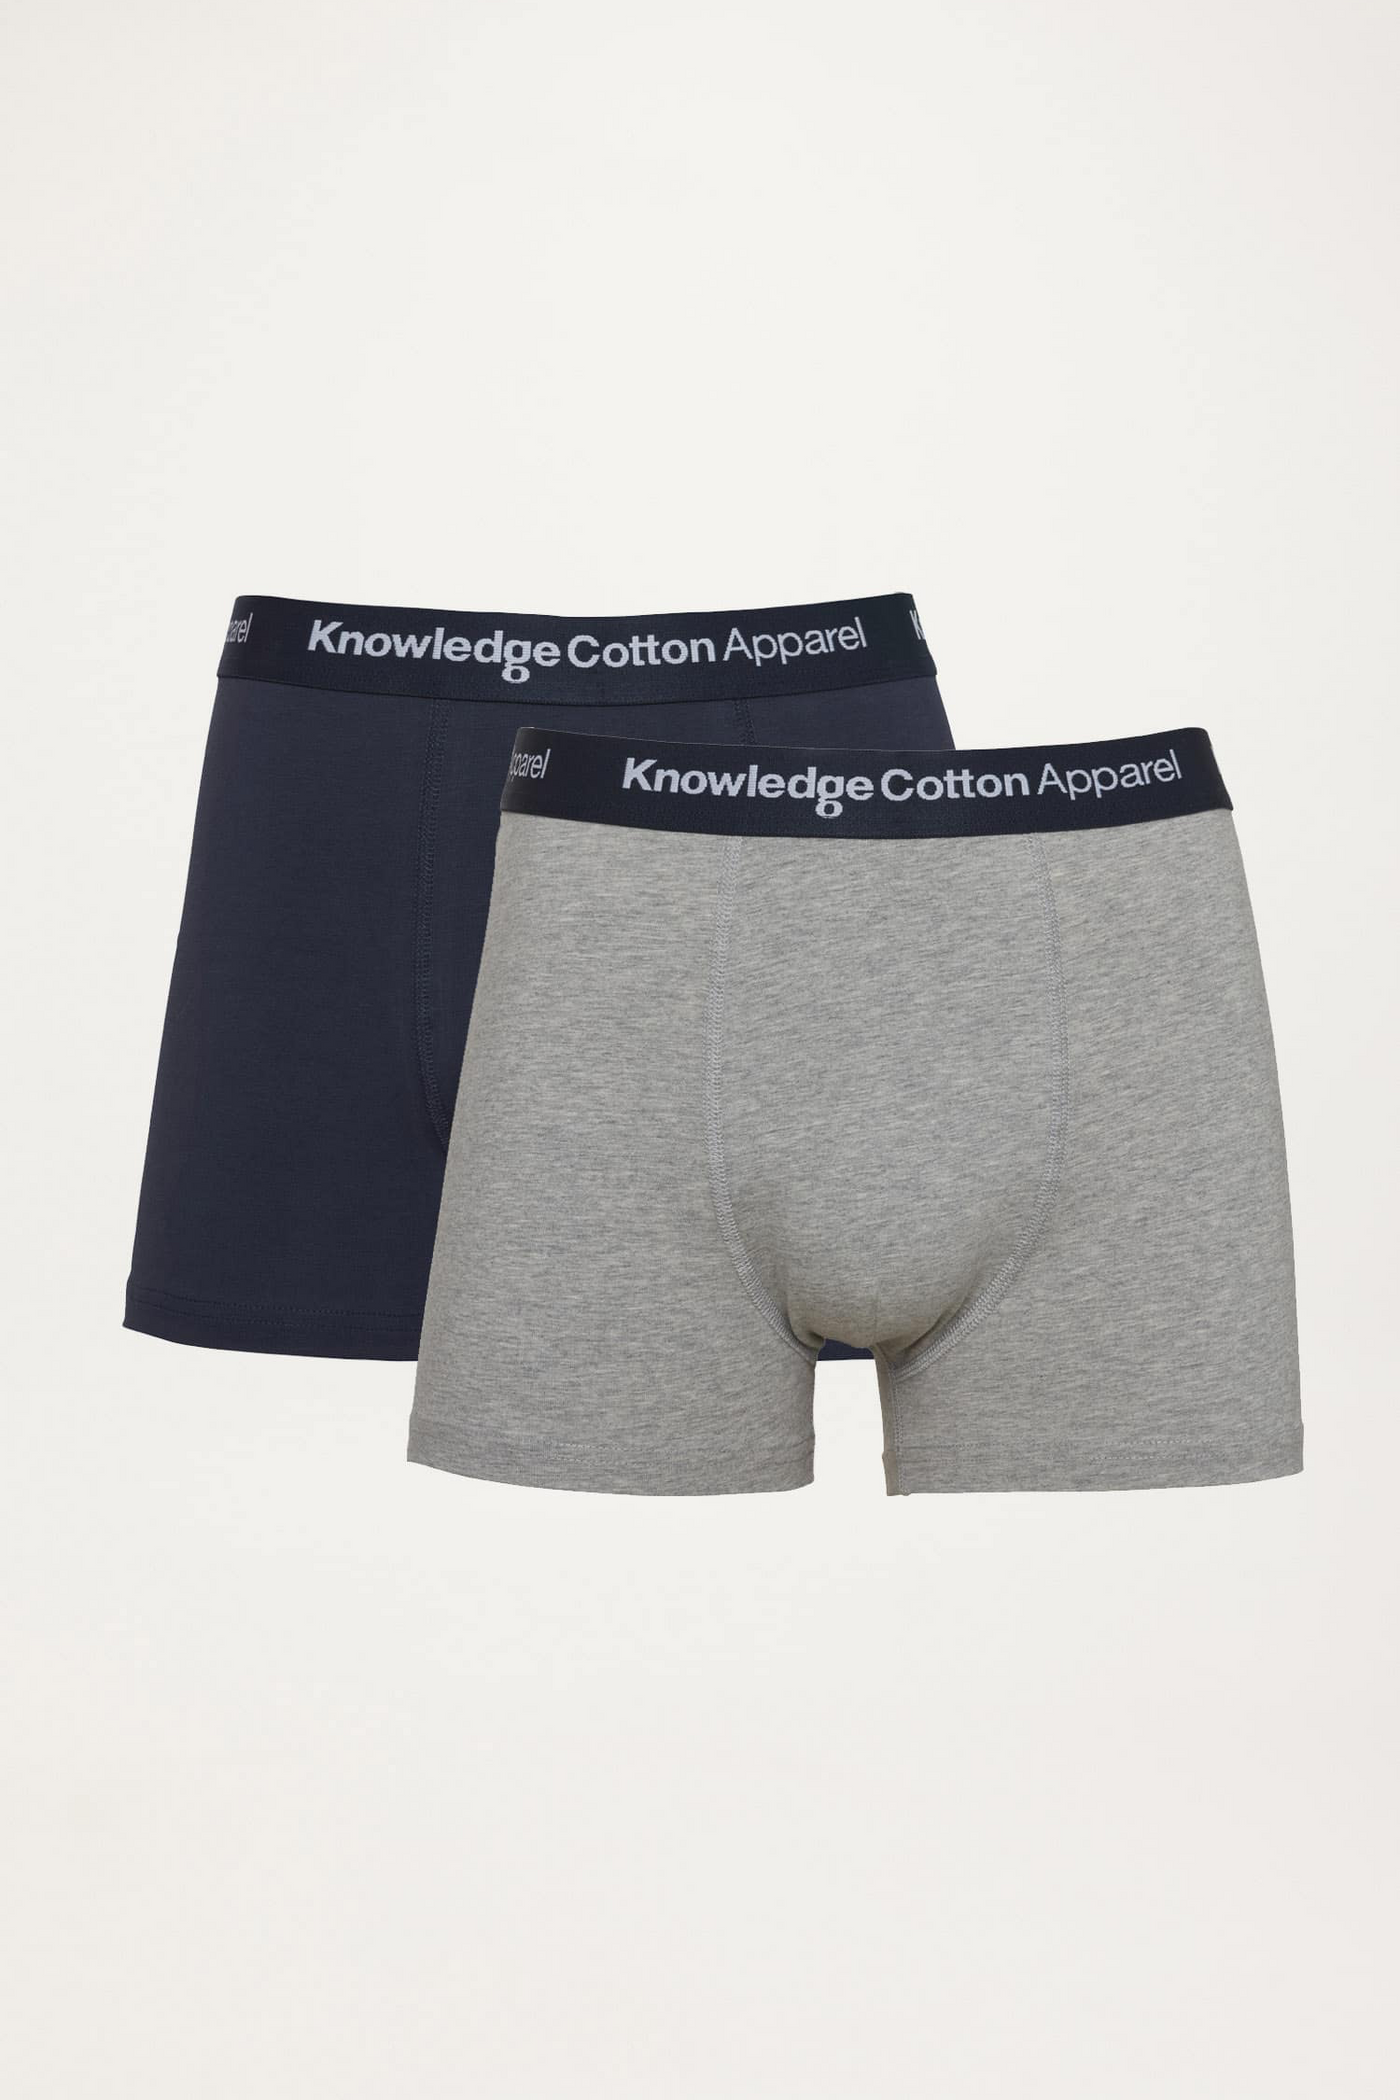 Knowledge Apparel 2 Pack Underwear in Grey Melange-Mens-Ohh! By Gum - Shop Sustainable